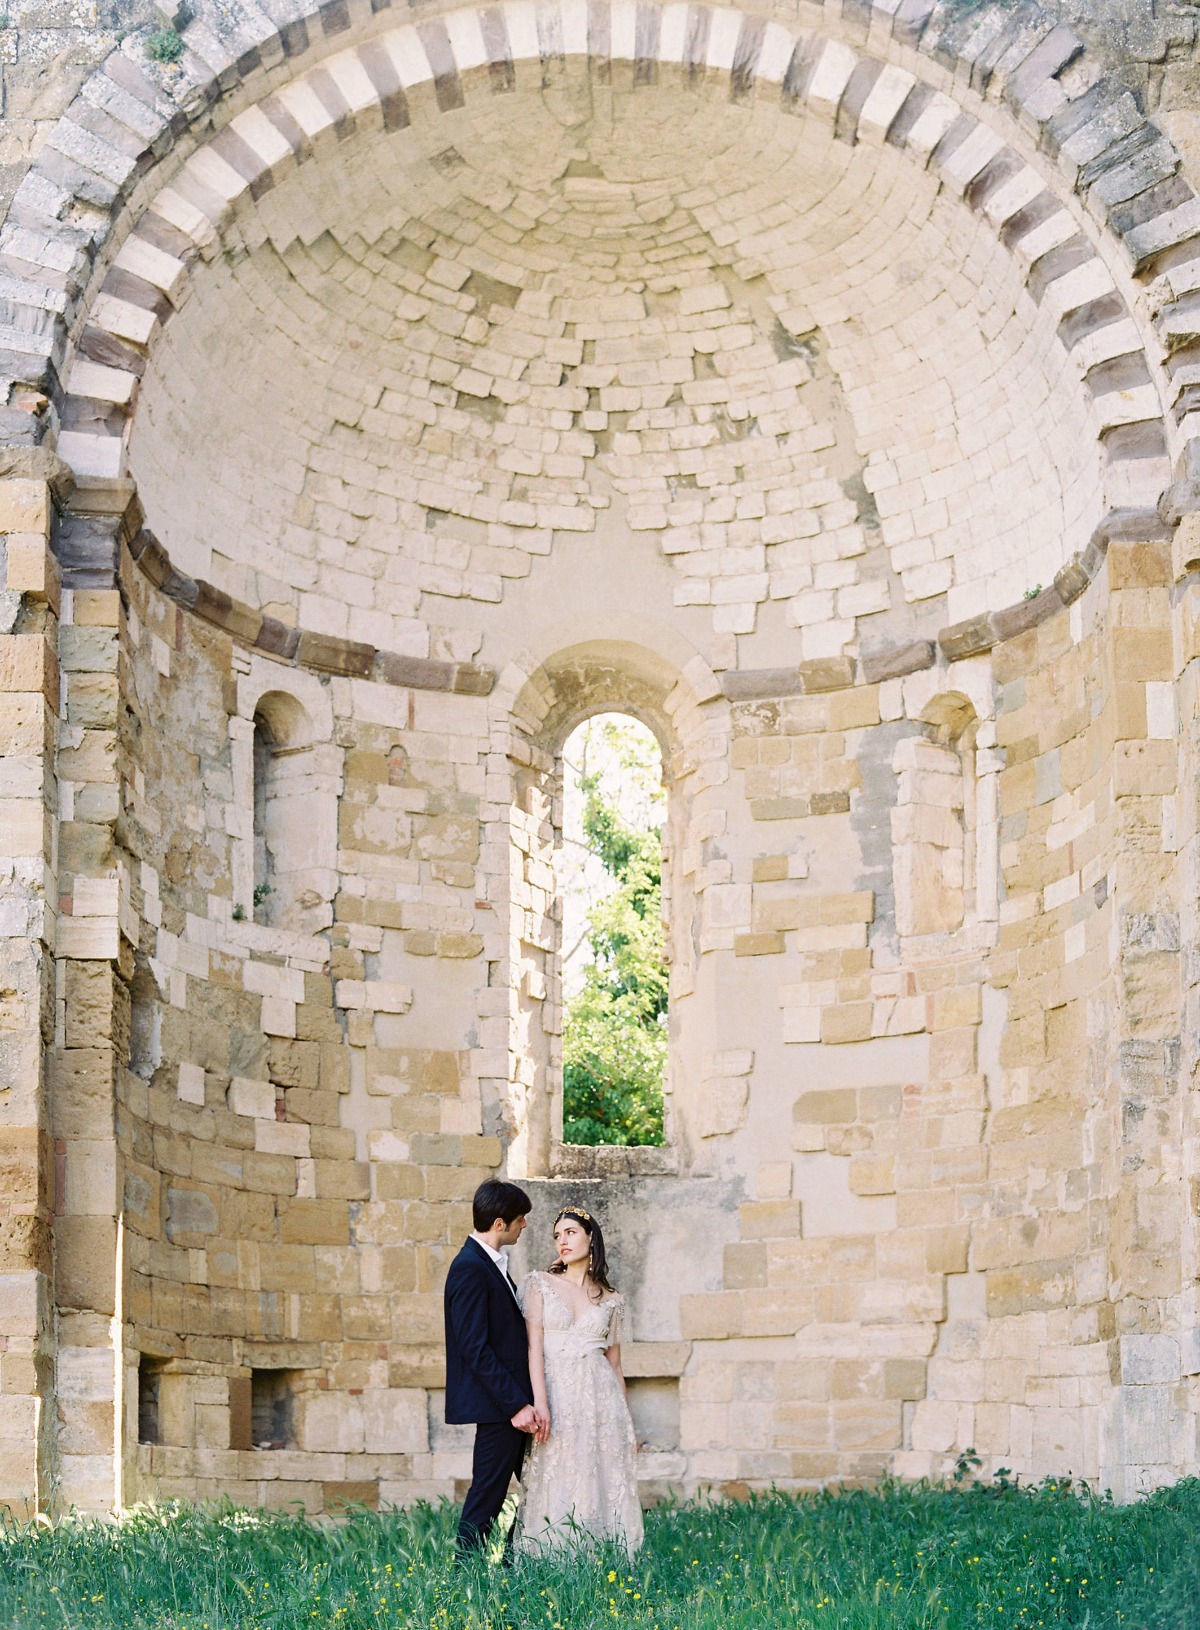 Timeless and ethereal bride and groom fashion in Italy